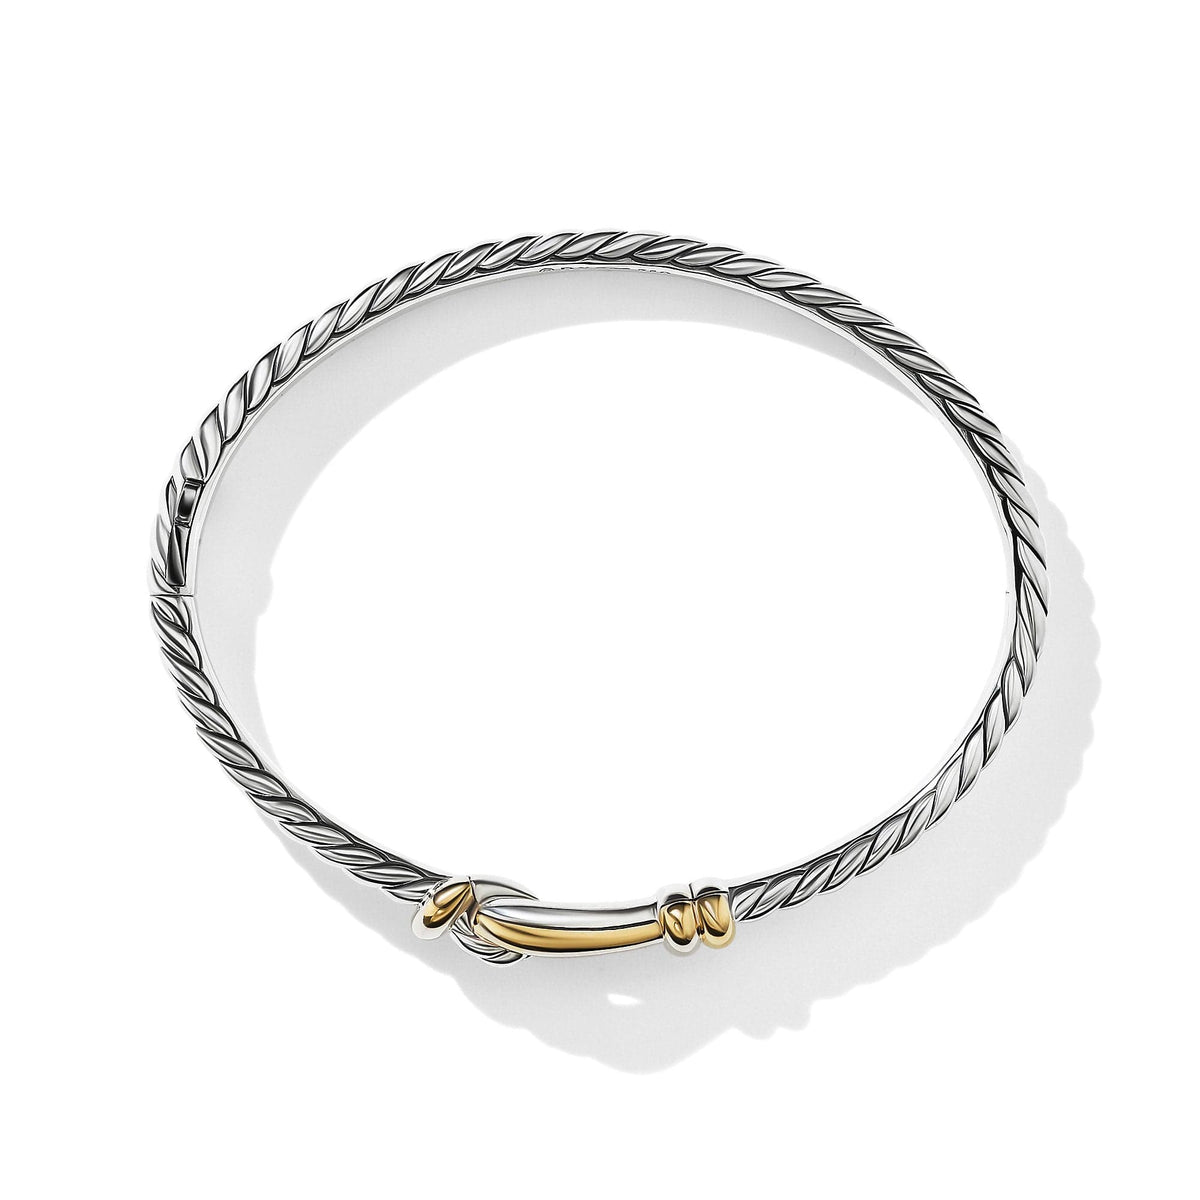 Thoroughbred Loop Bracelet with 18K Yellow Gold